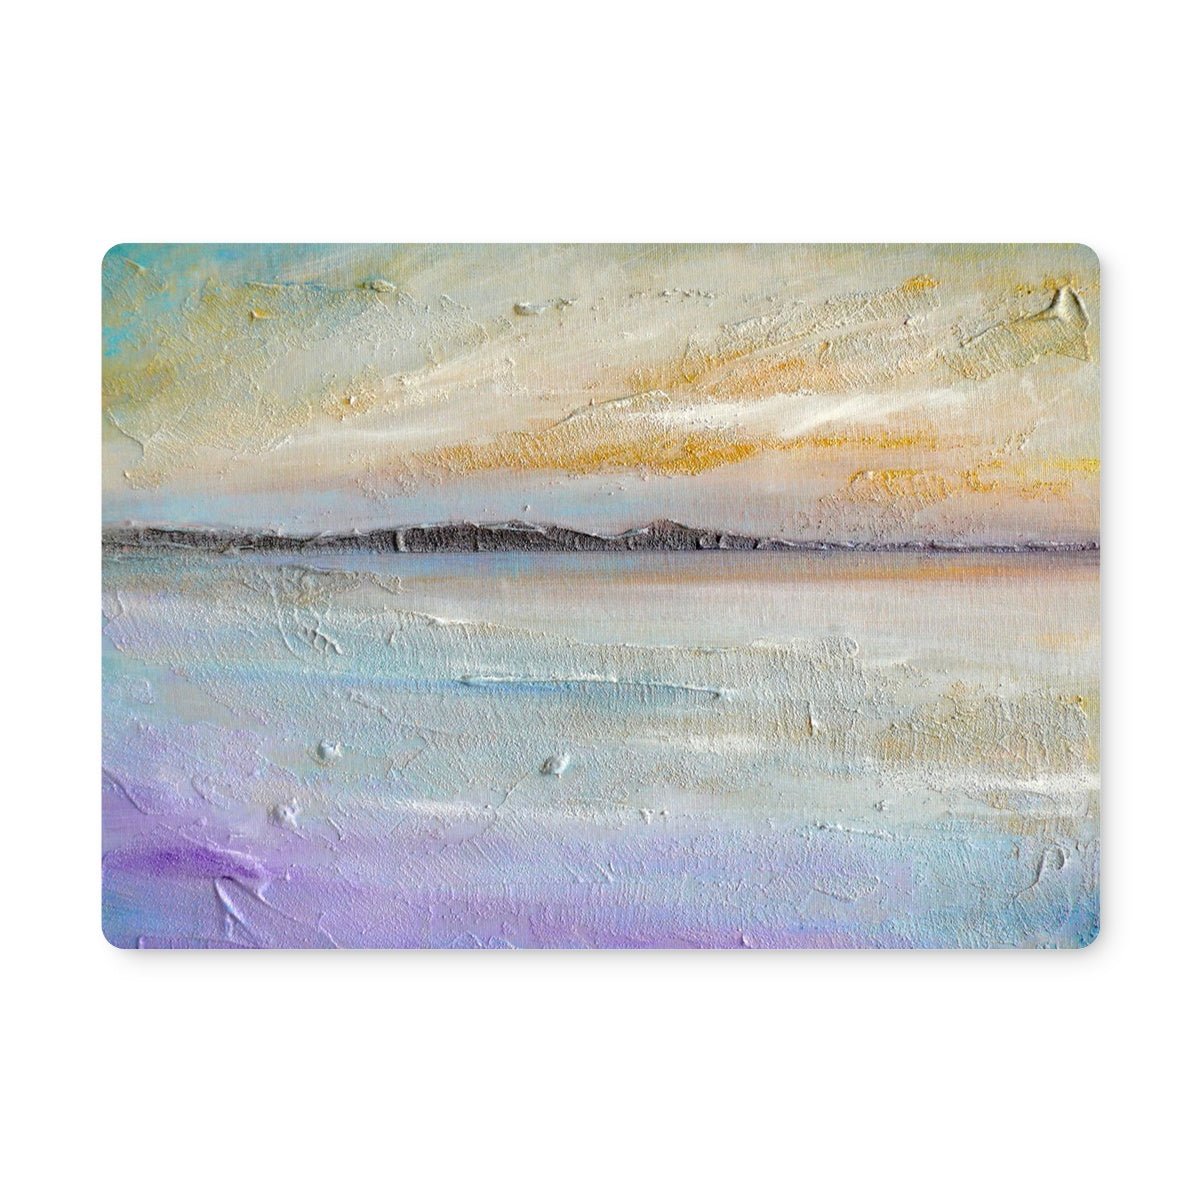 Sollas Beach North Uist Art Gifts Placemat-Placemats-Hebridean Islands Art Gallery-Single Placemat-Paintings, Prints, Homeware, Art Gifts From Scotland By Scottish Artist Kevin Hunter